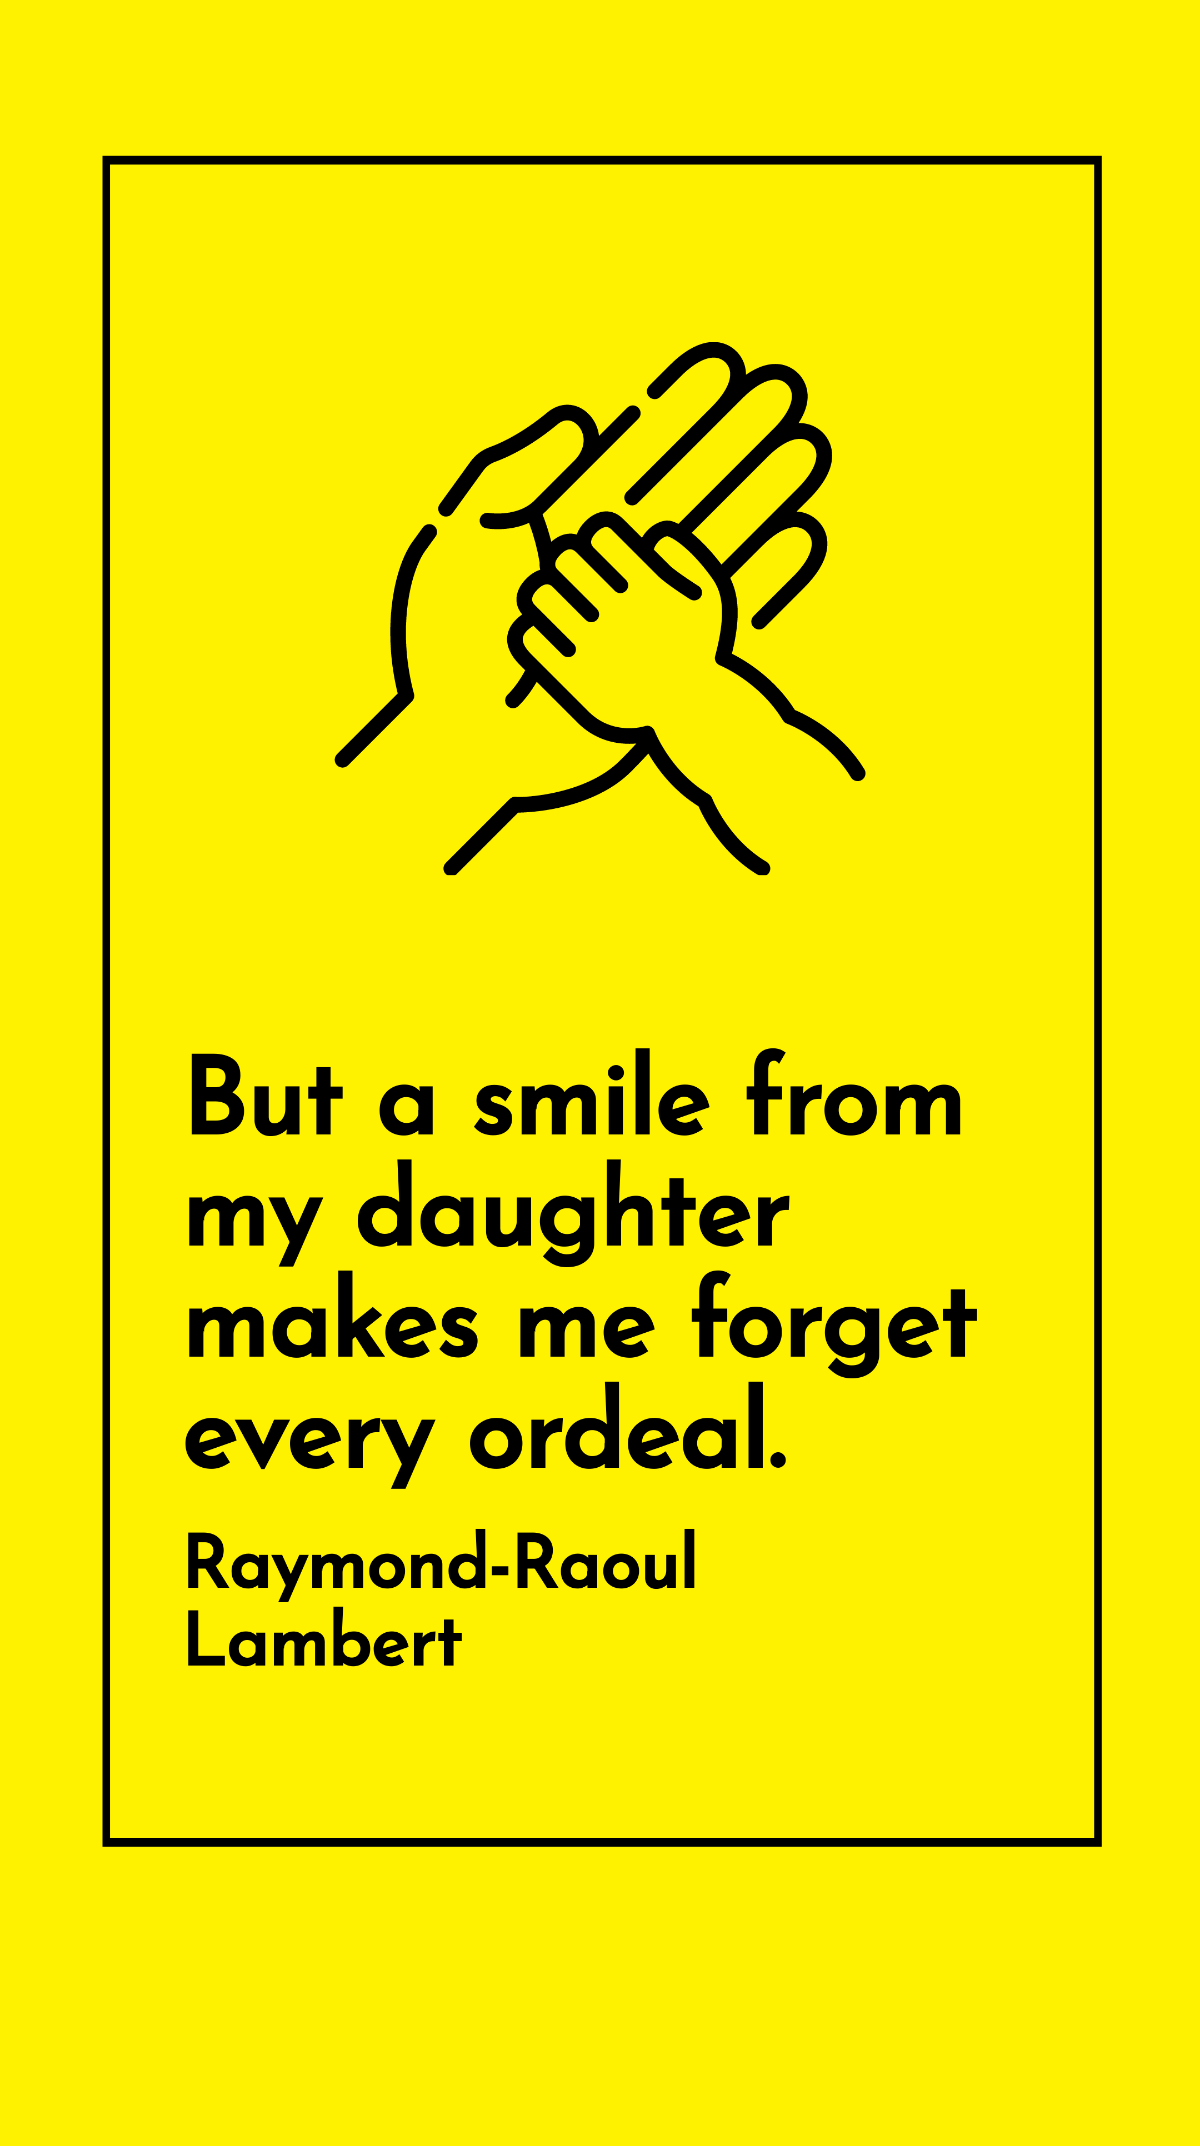 Free Raymond-Raoul Lambert - But a smile from my daughter makes me forget every ordeal. Template